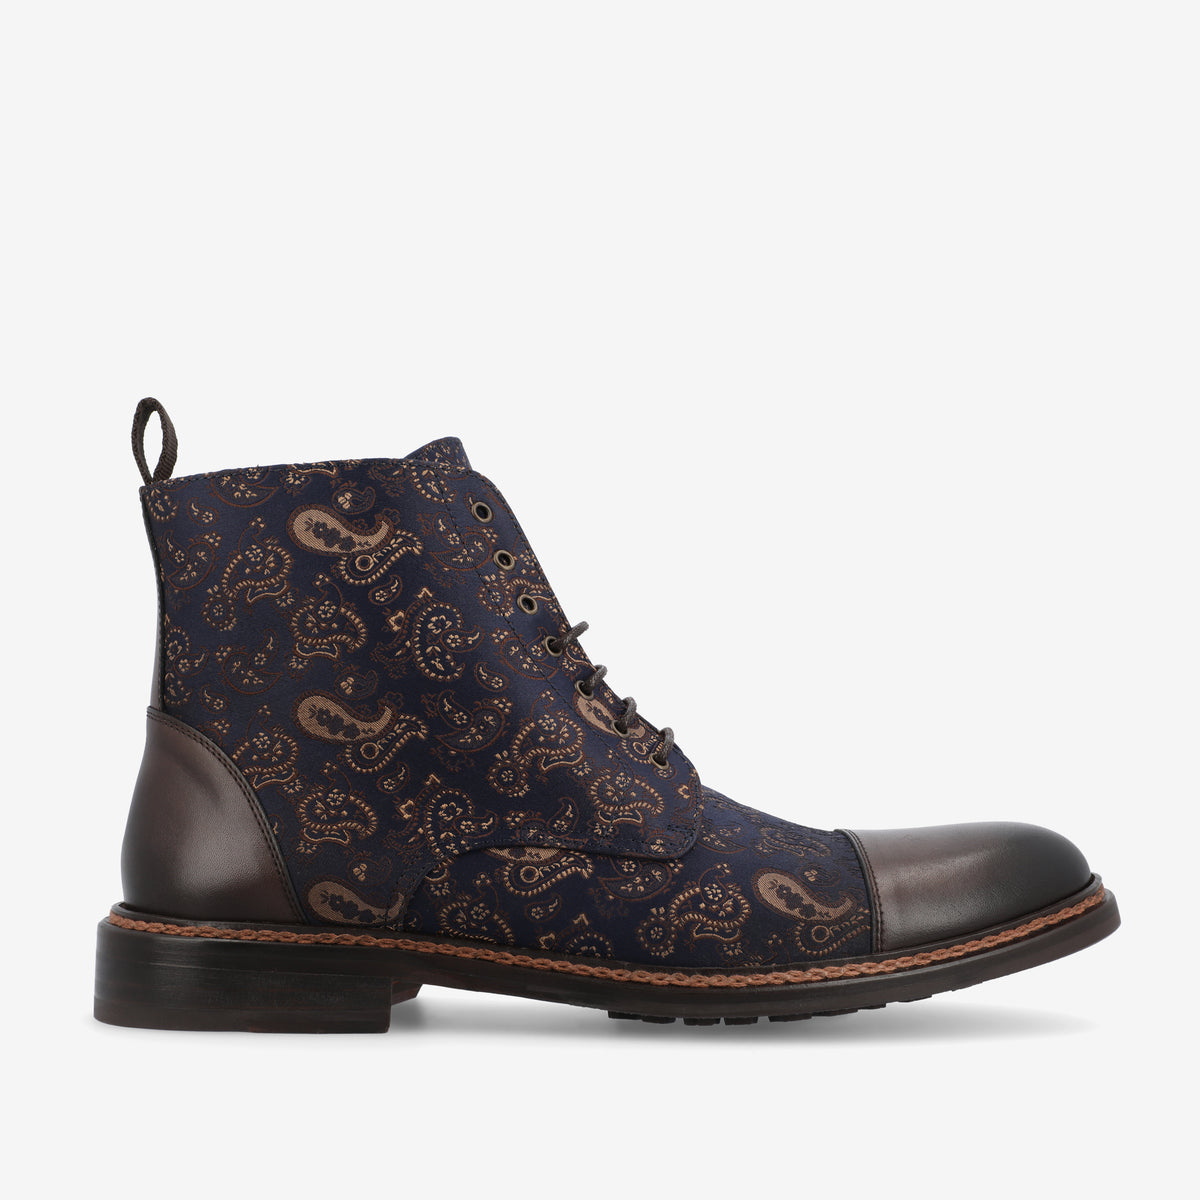 The Jack in Brown Paisley